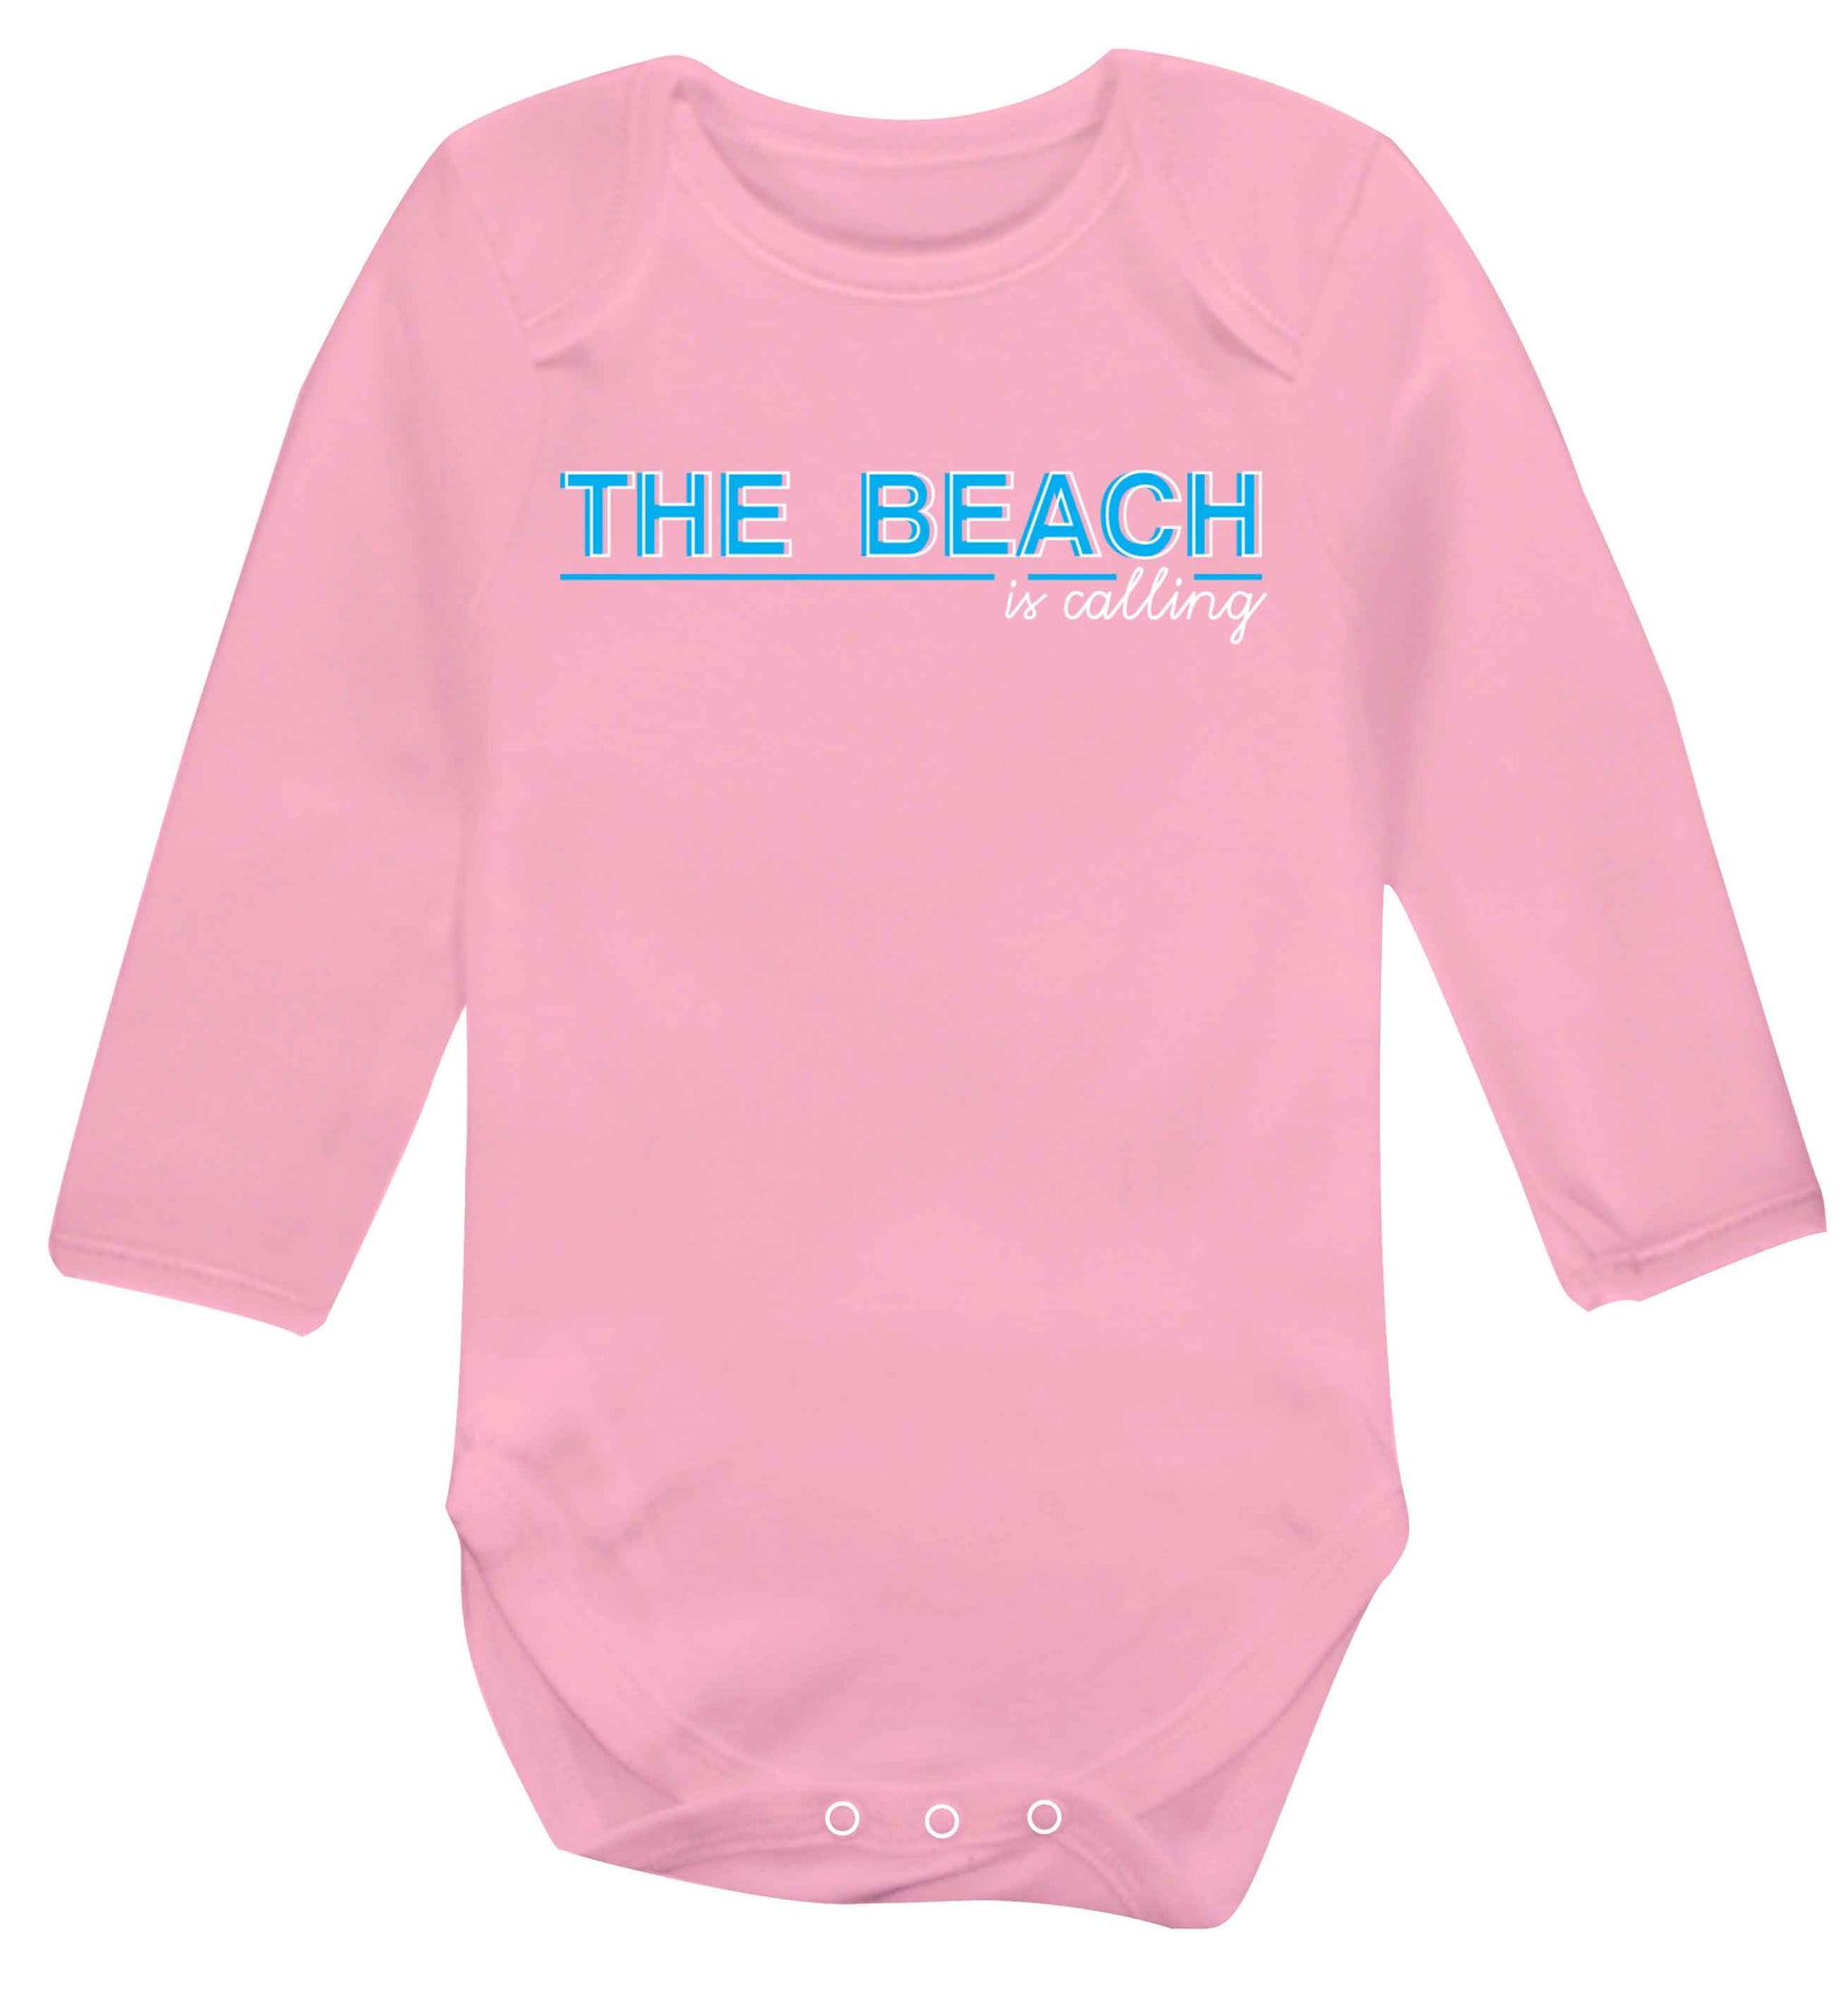 The beach is calling Baby Vest long sleeved pale pink 6-12 months